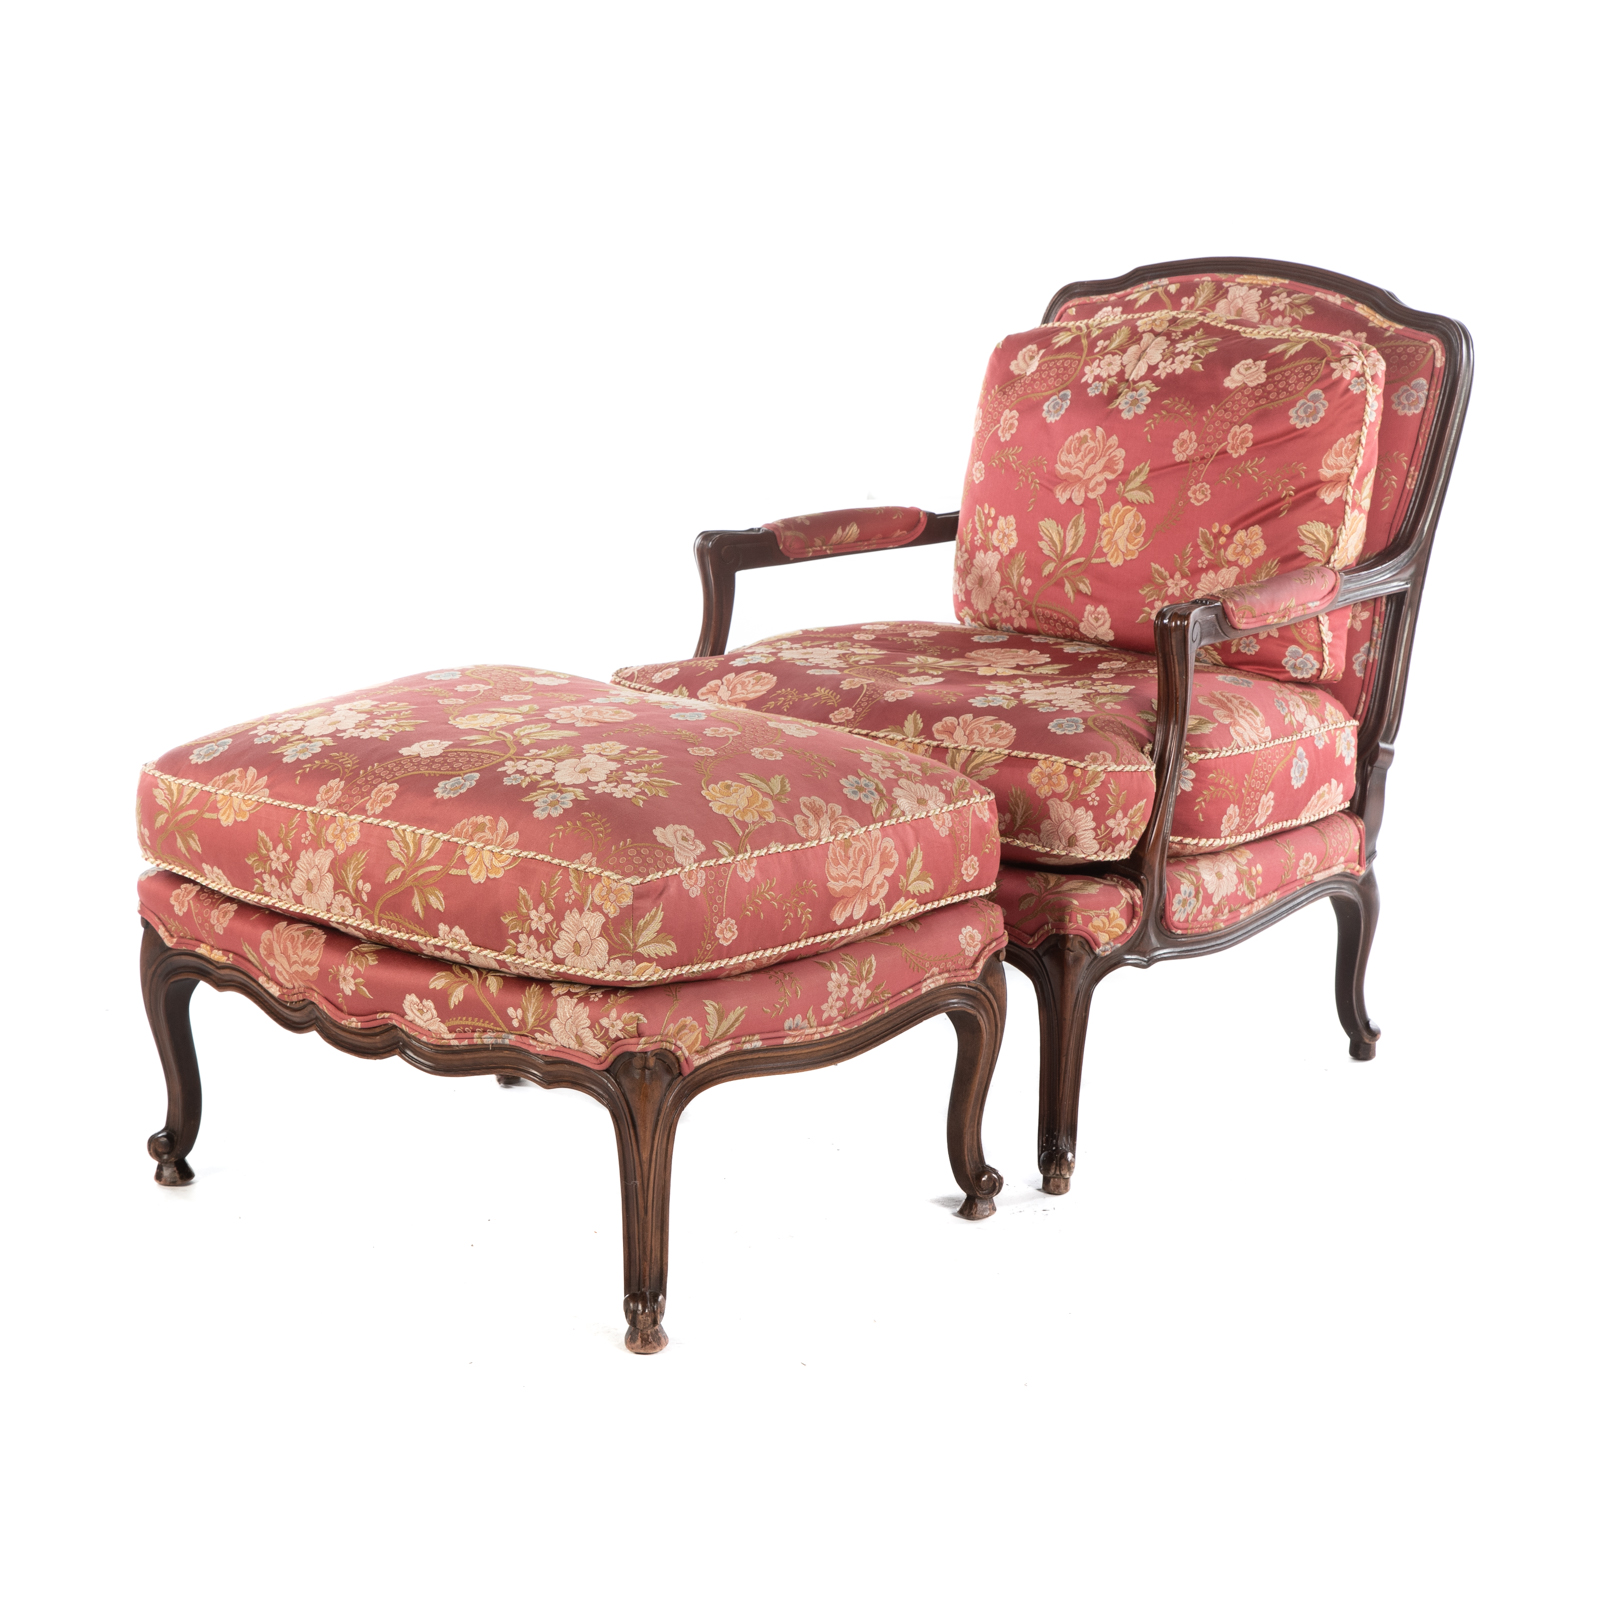 LOUIS XV STYLE UPHOLSTERED CHAIR 29dda5